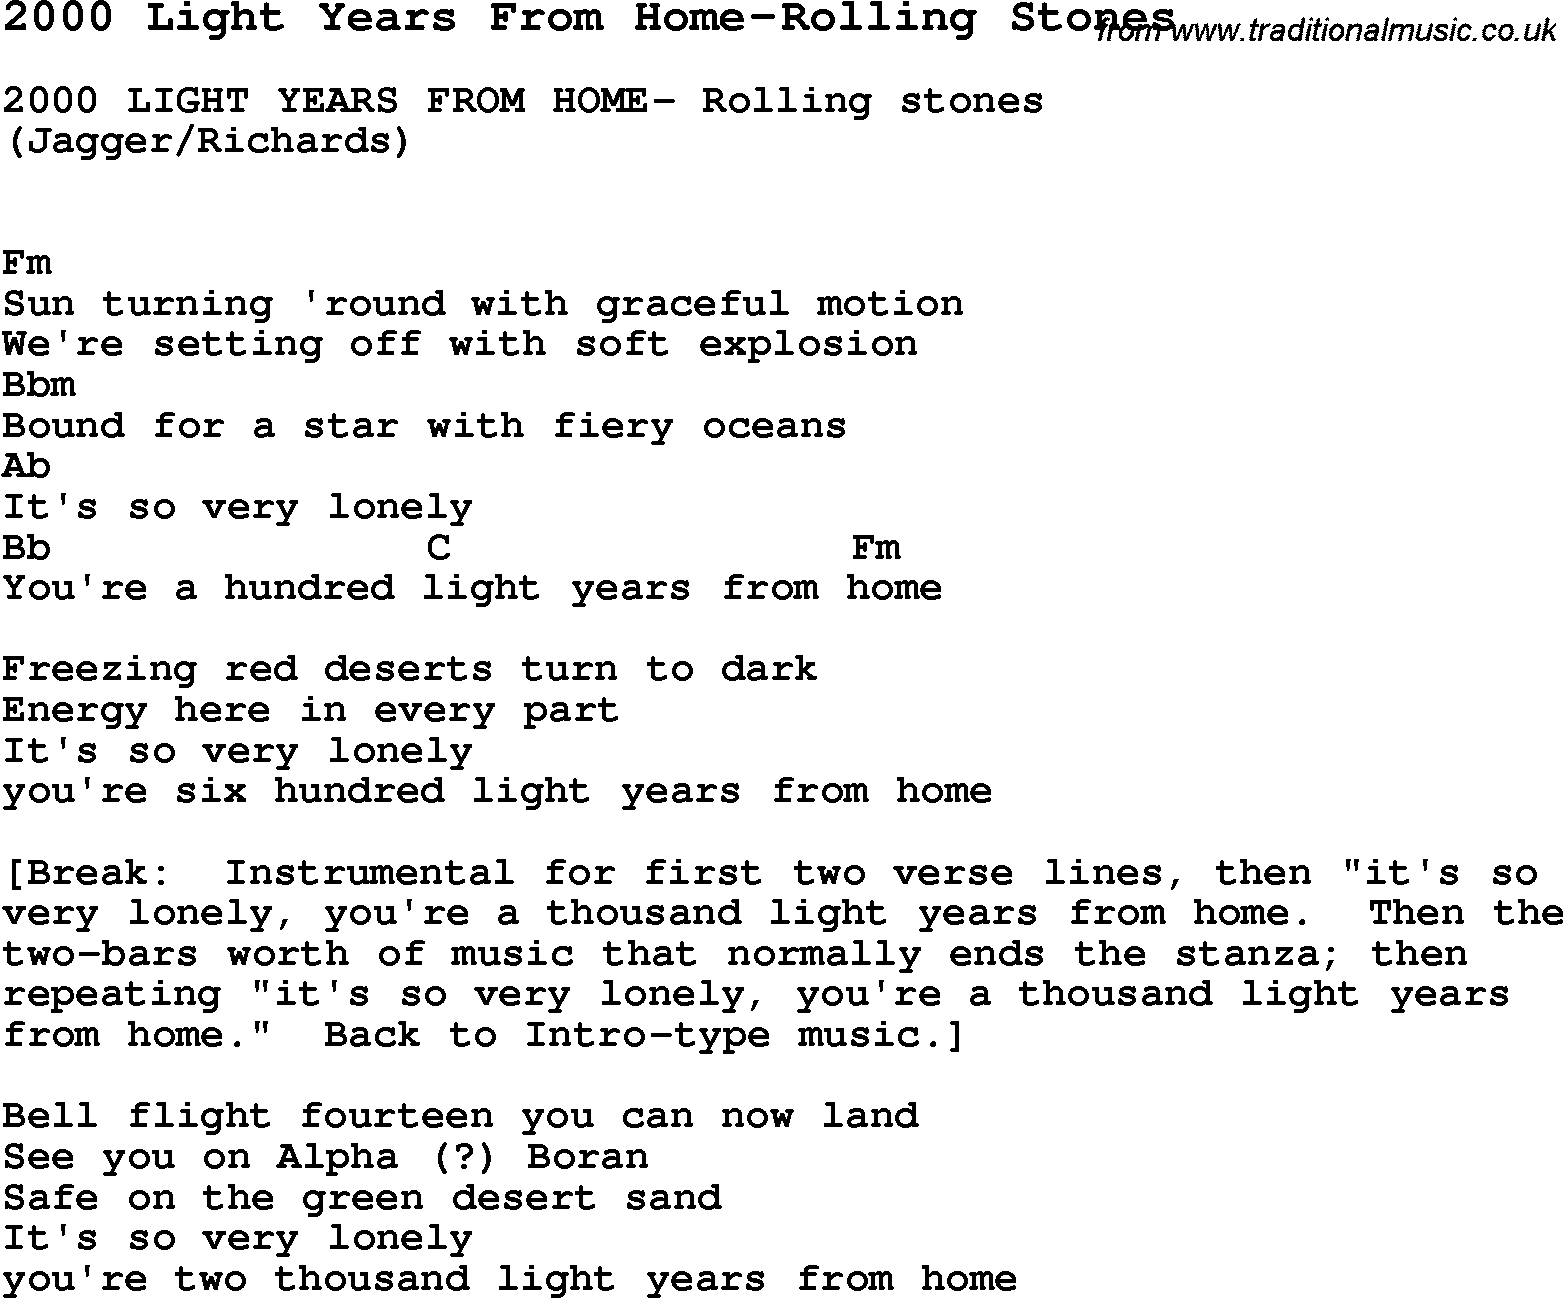 Blues Guitar Song, lyrics, chords, tablature, playing hints for 2000 Light Years From Home-Rolling Stones